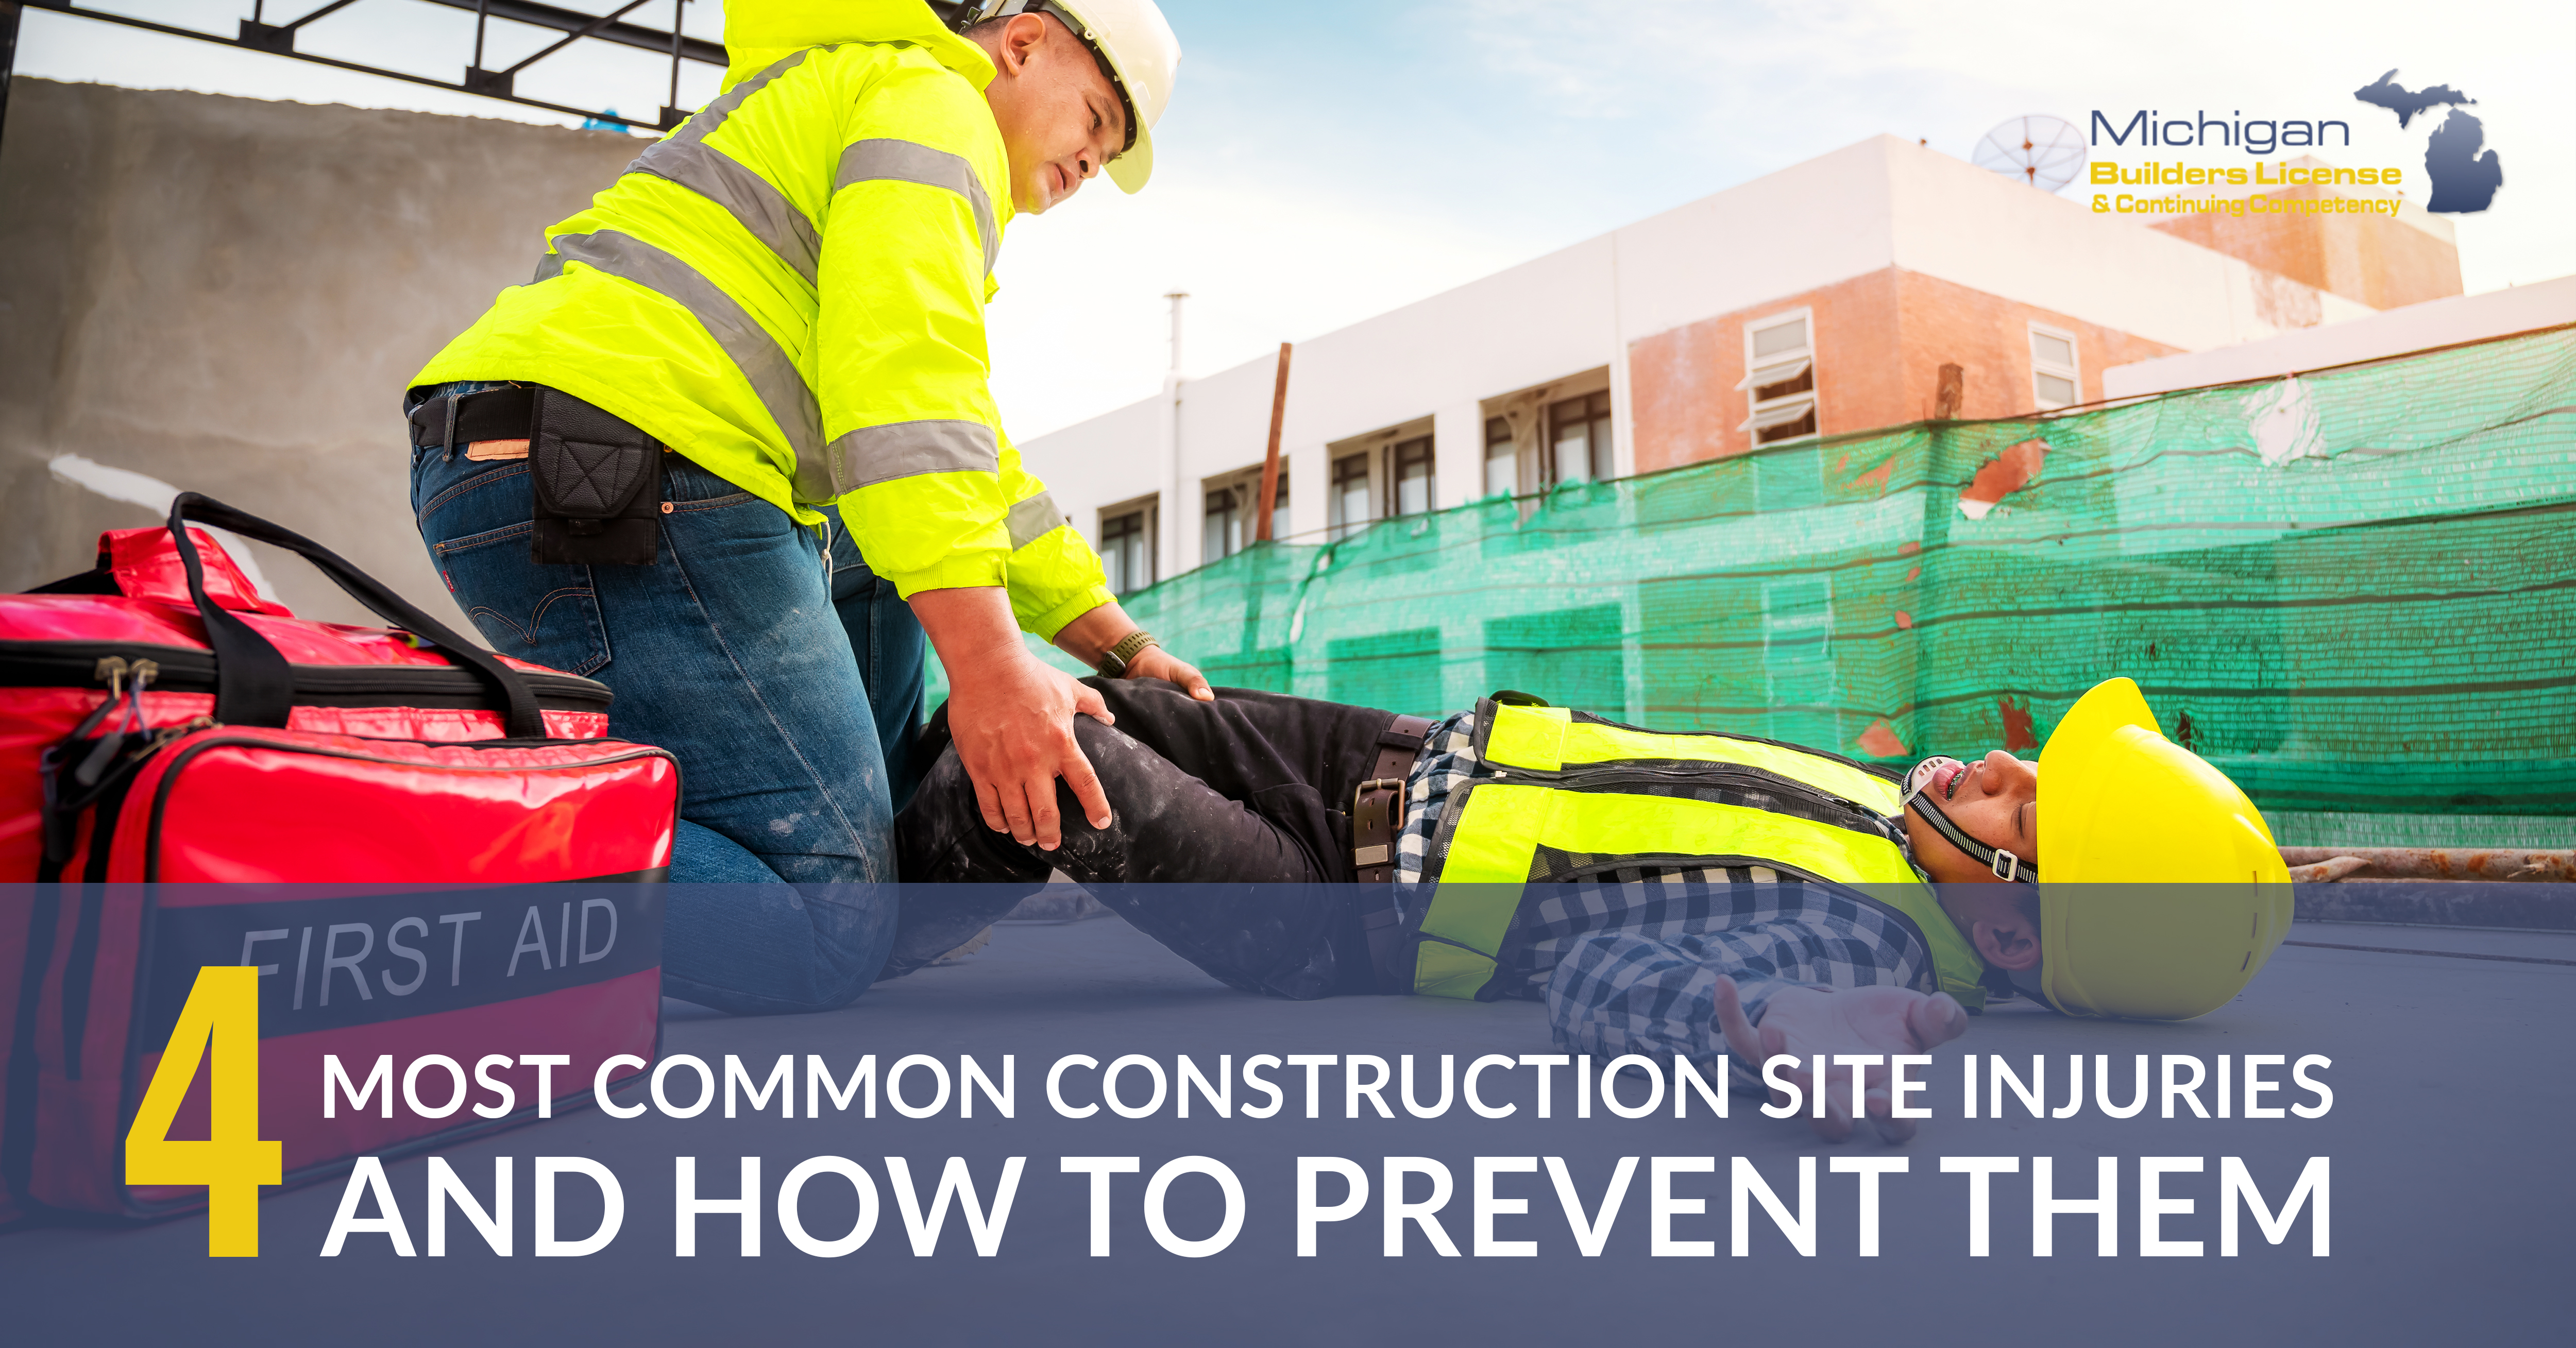 The 4 Most Common Construction Site Injuries and How to Prevent Them